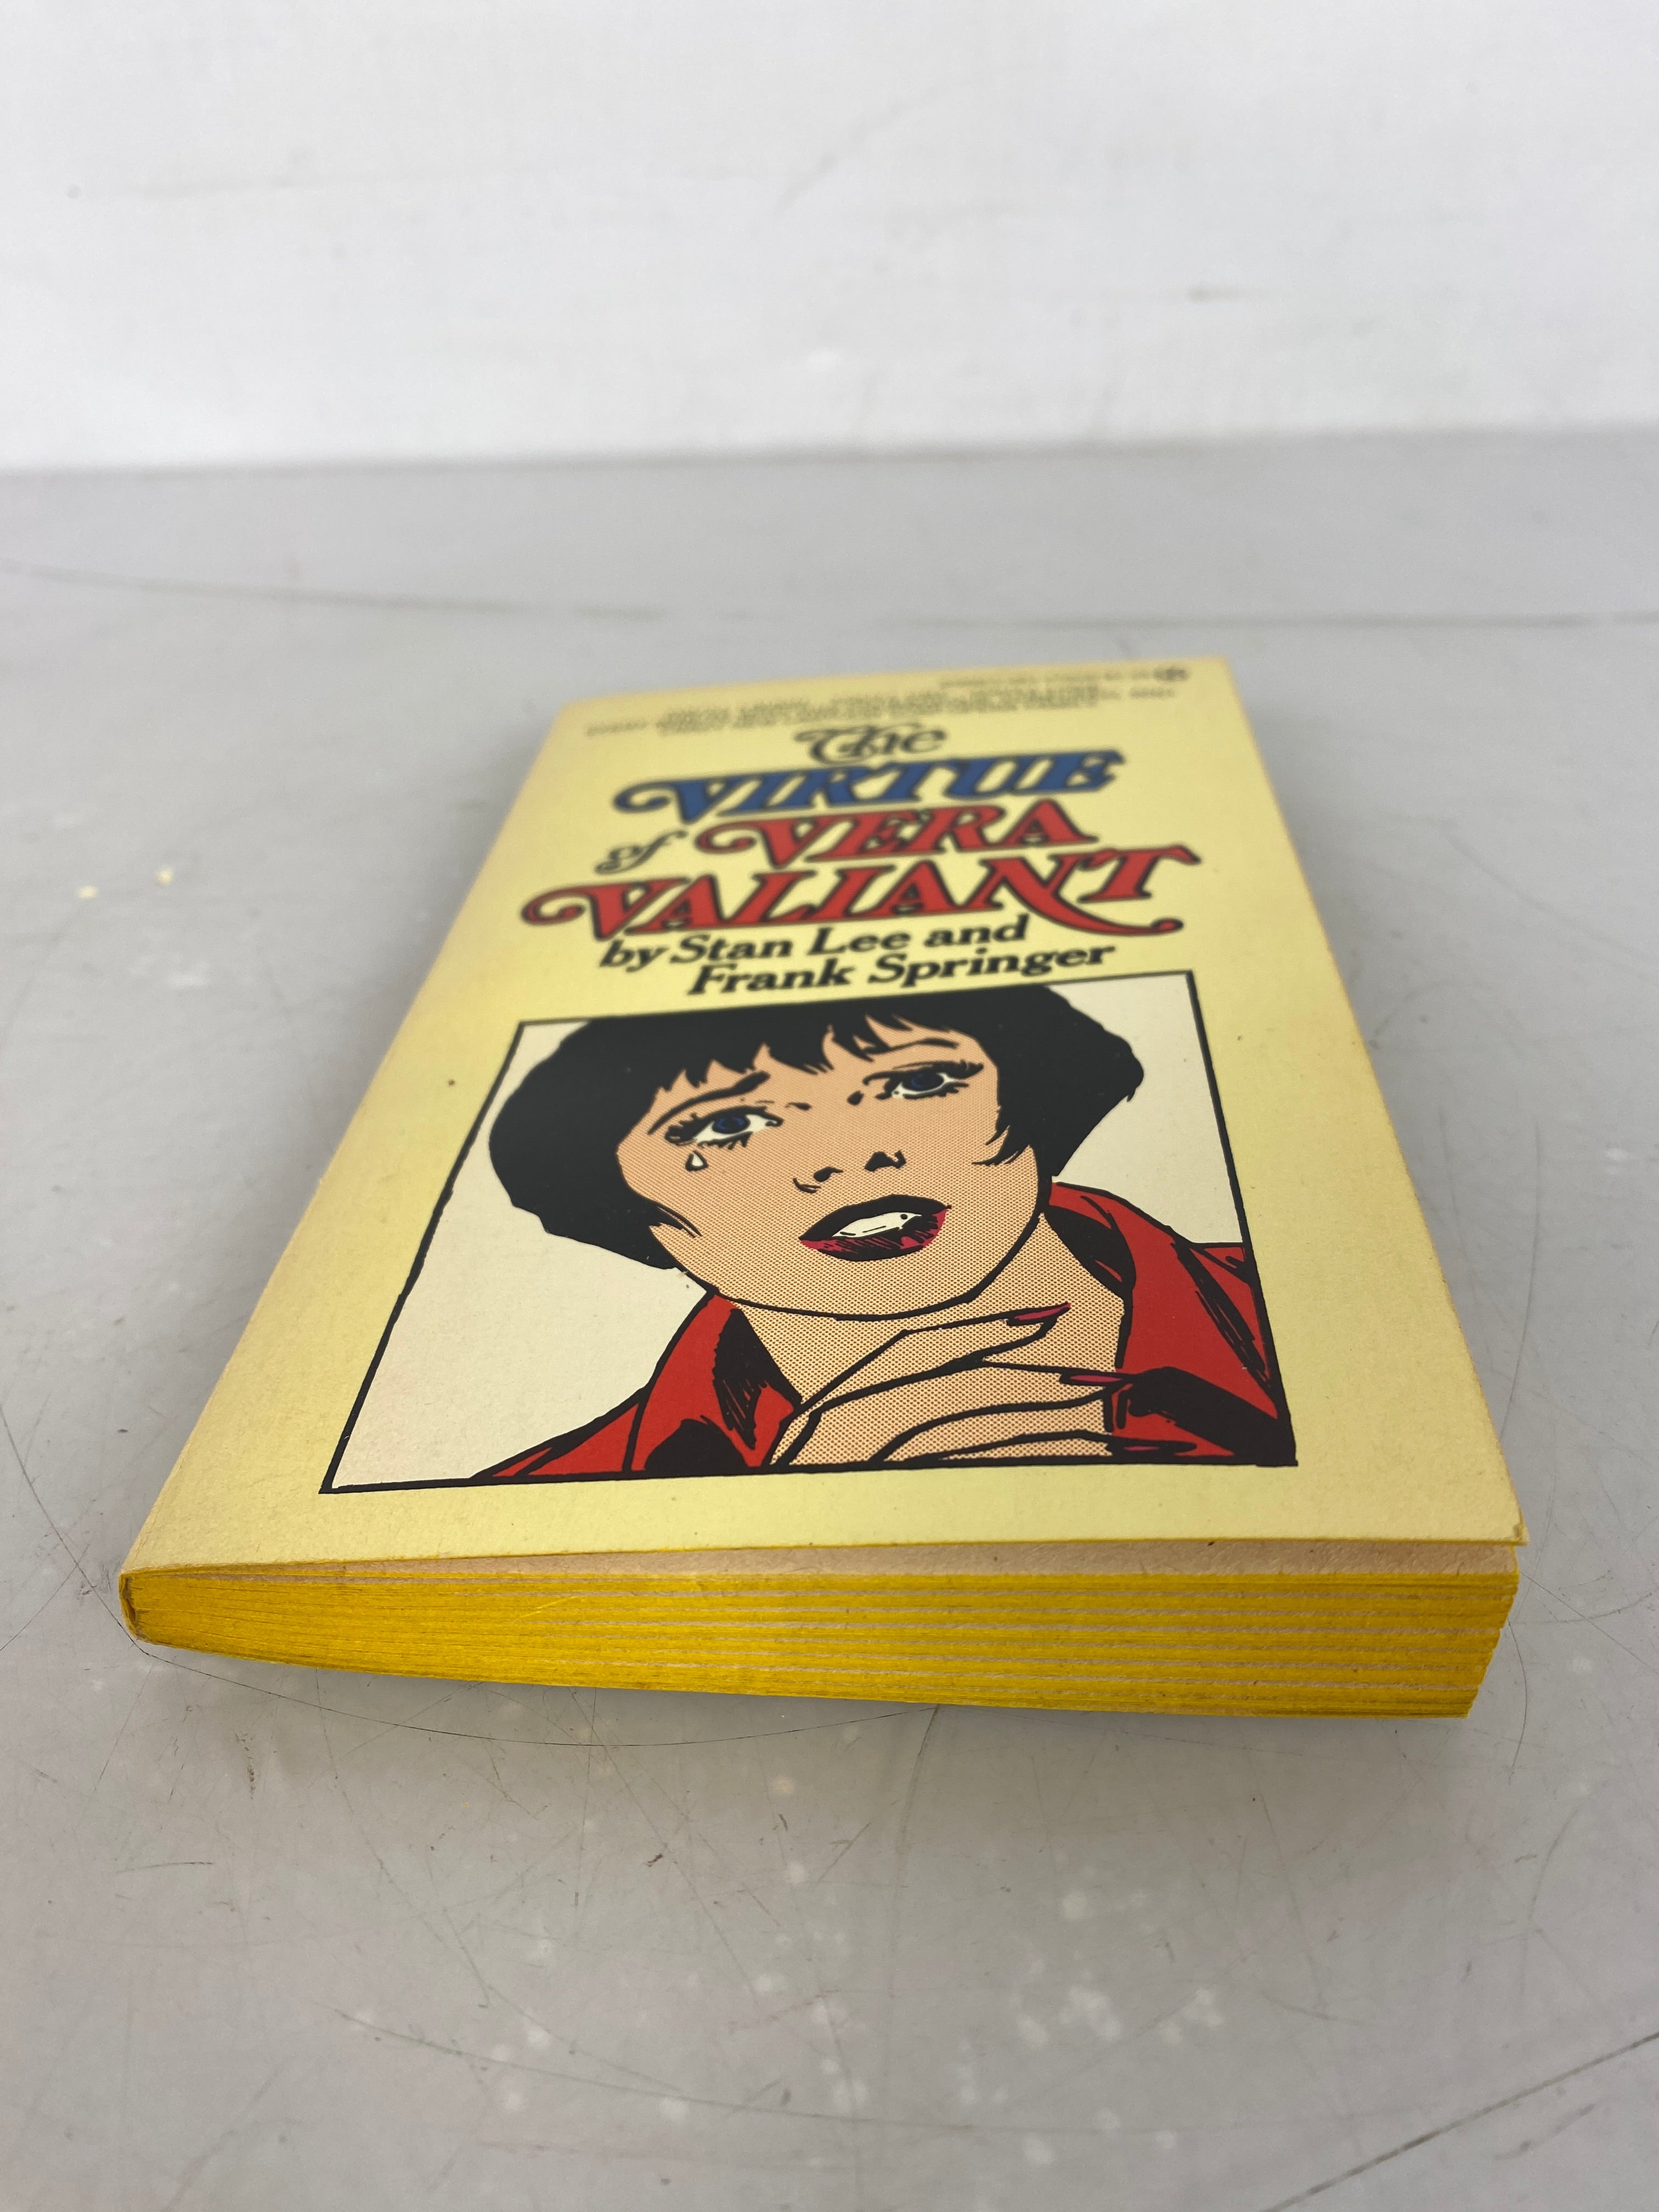 The Virtue of Vera Valiant by Stan Lee and Frank Springer 1977 SC